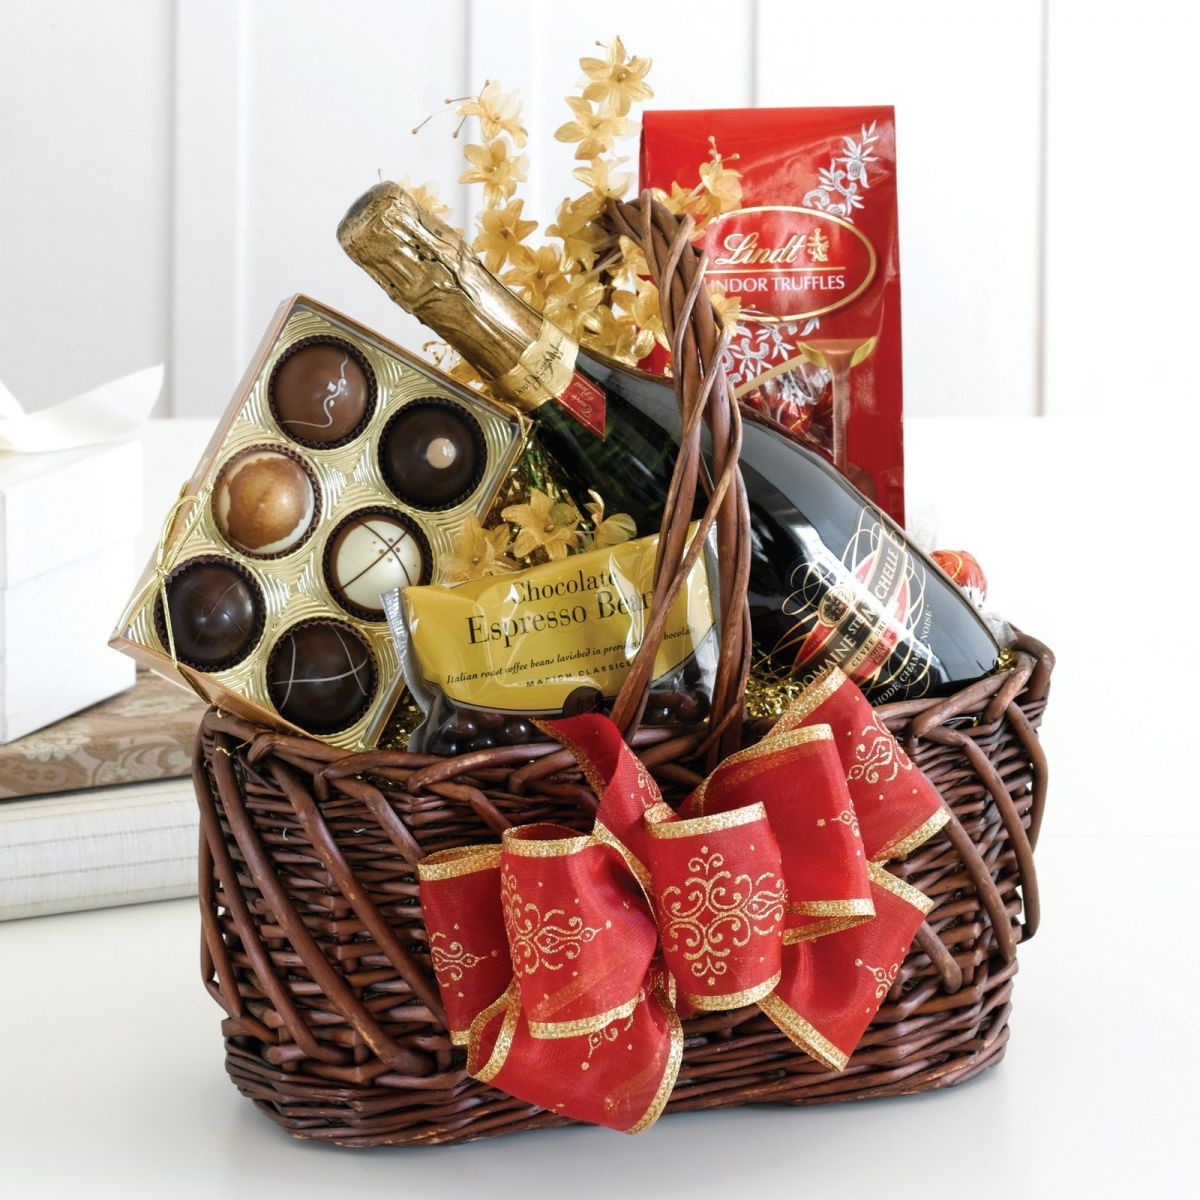 Basket Gift Ideas
 Top 5 Amazing Gift Basket Ideas That You’ll Love